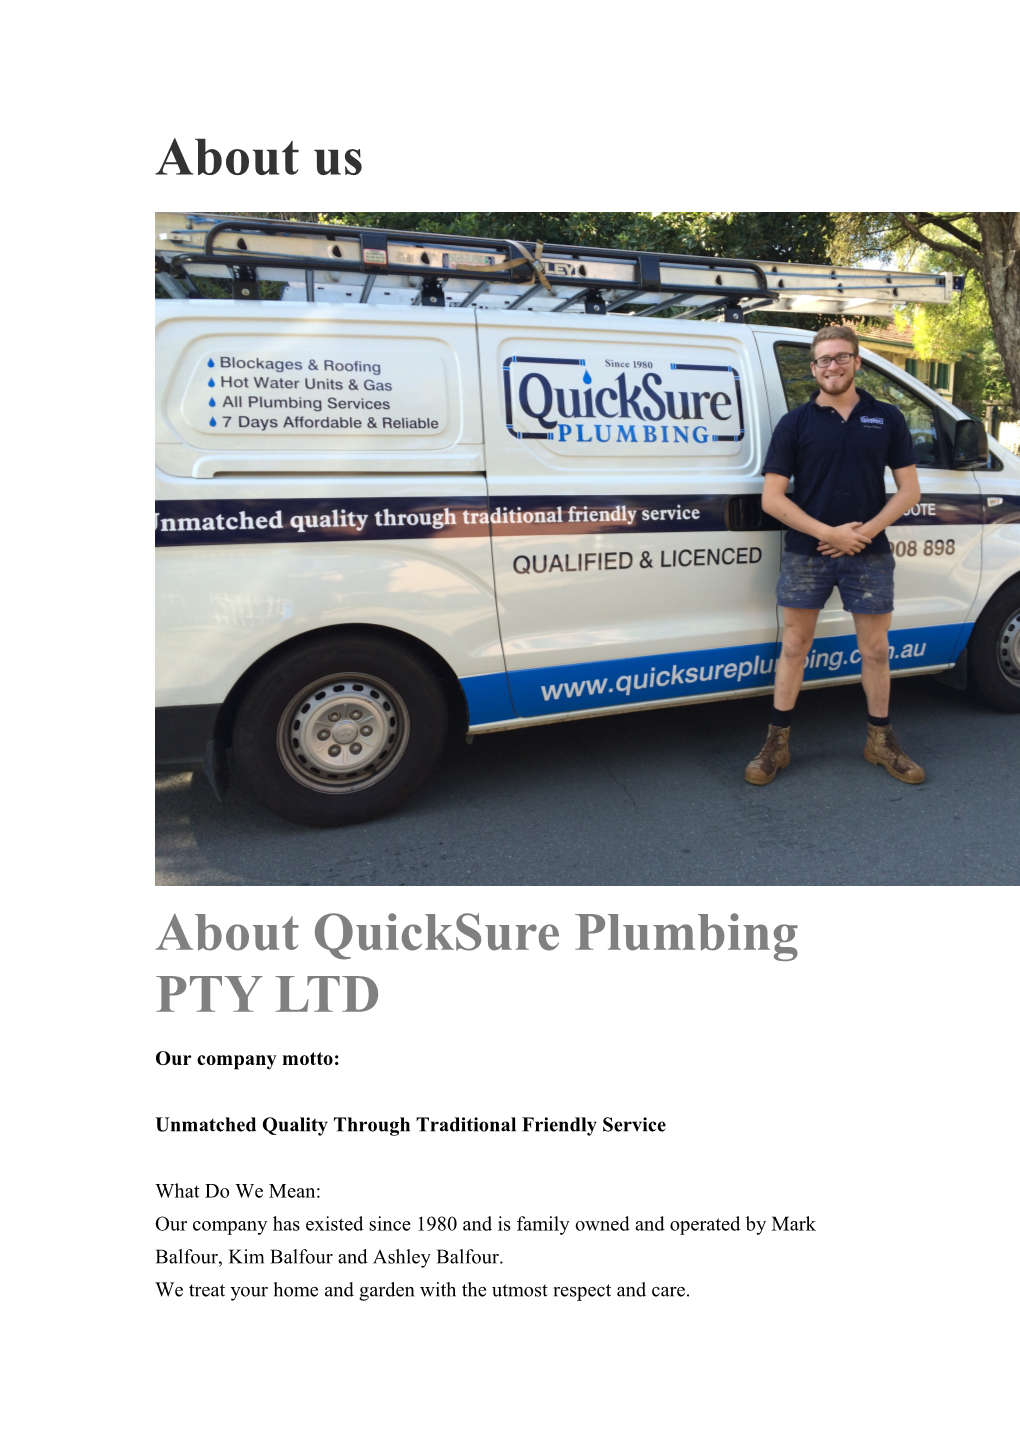 About Quicksure Plumbing PTY LTD